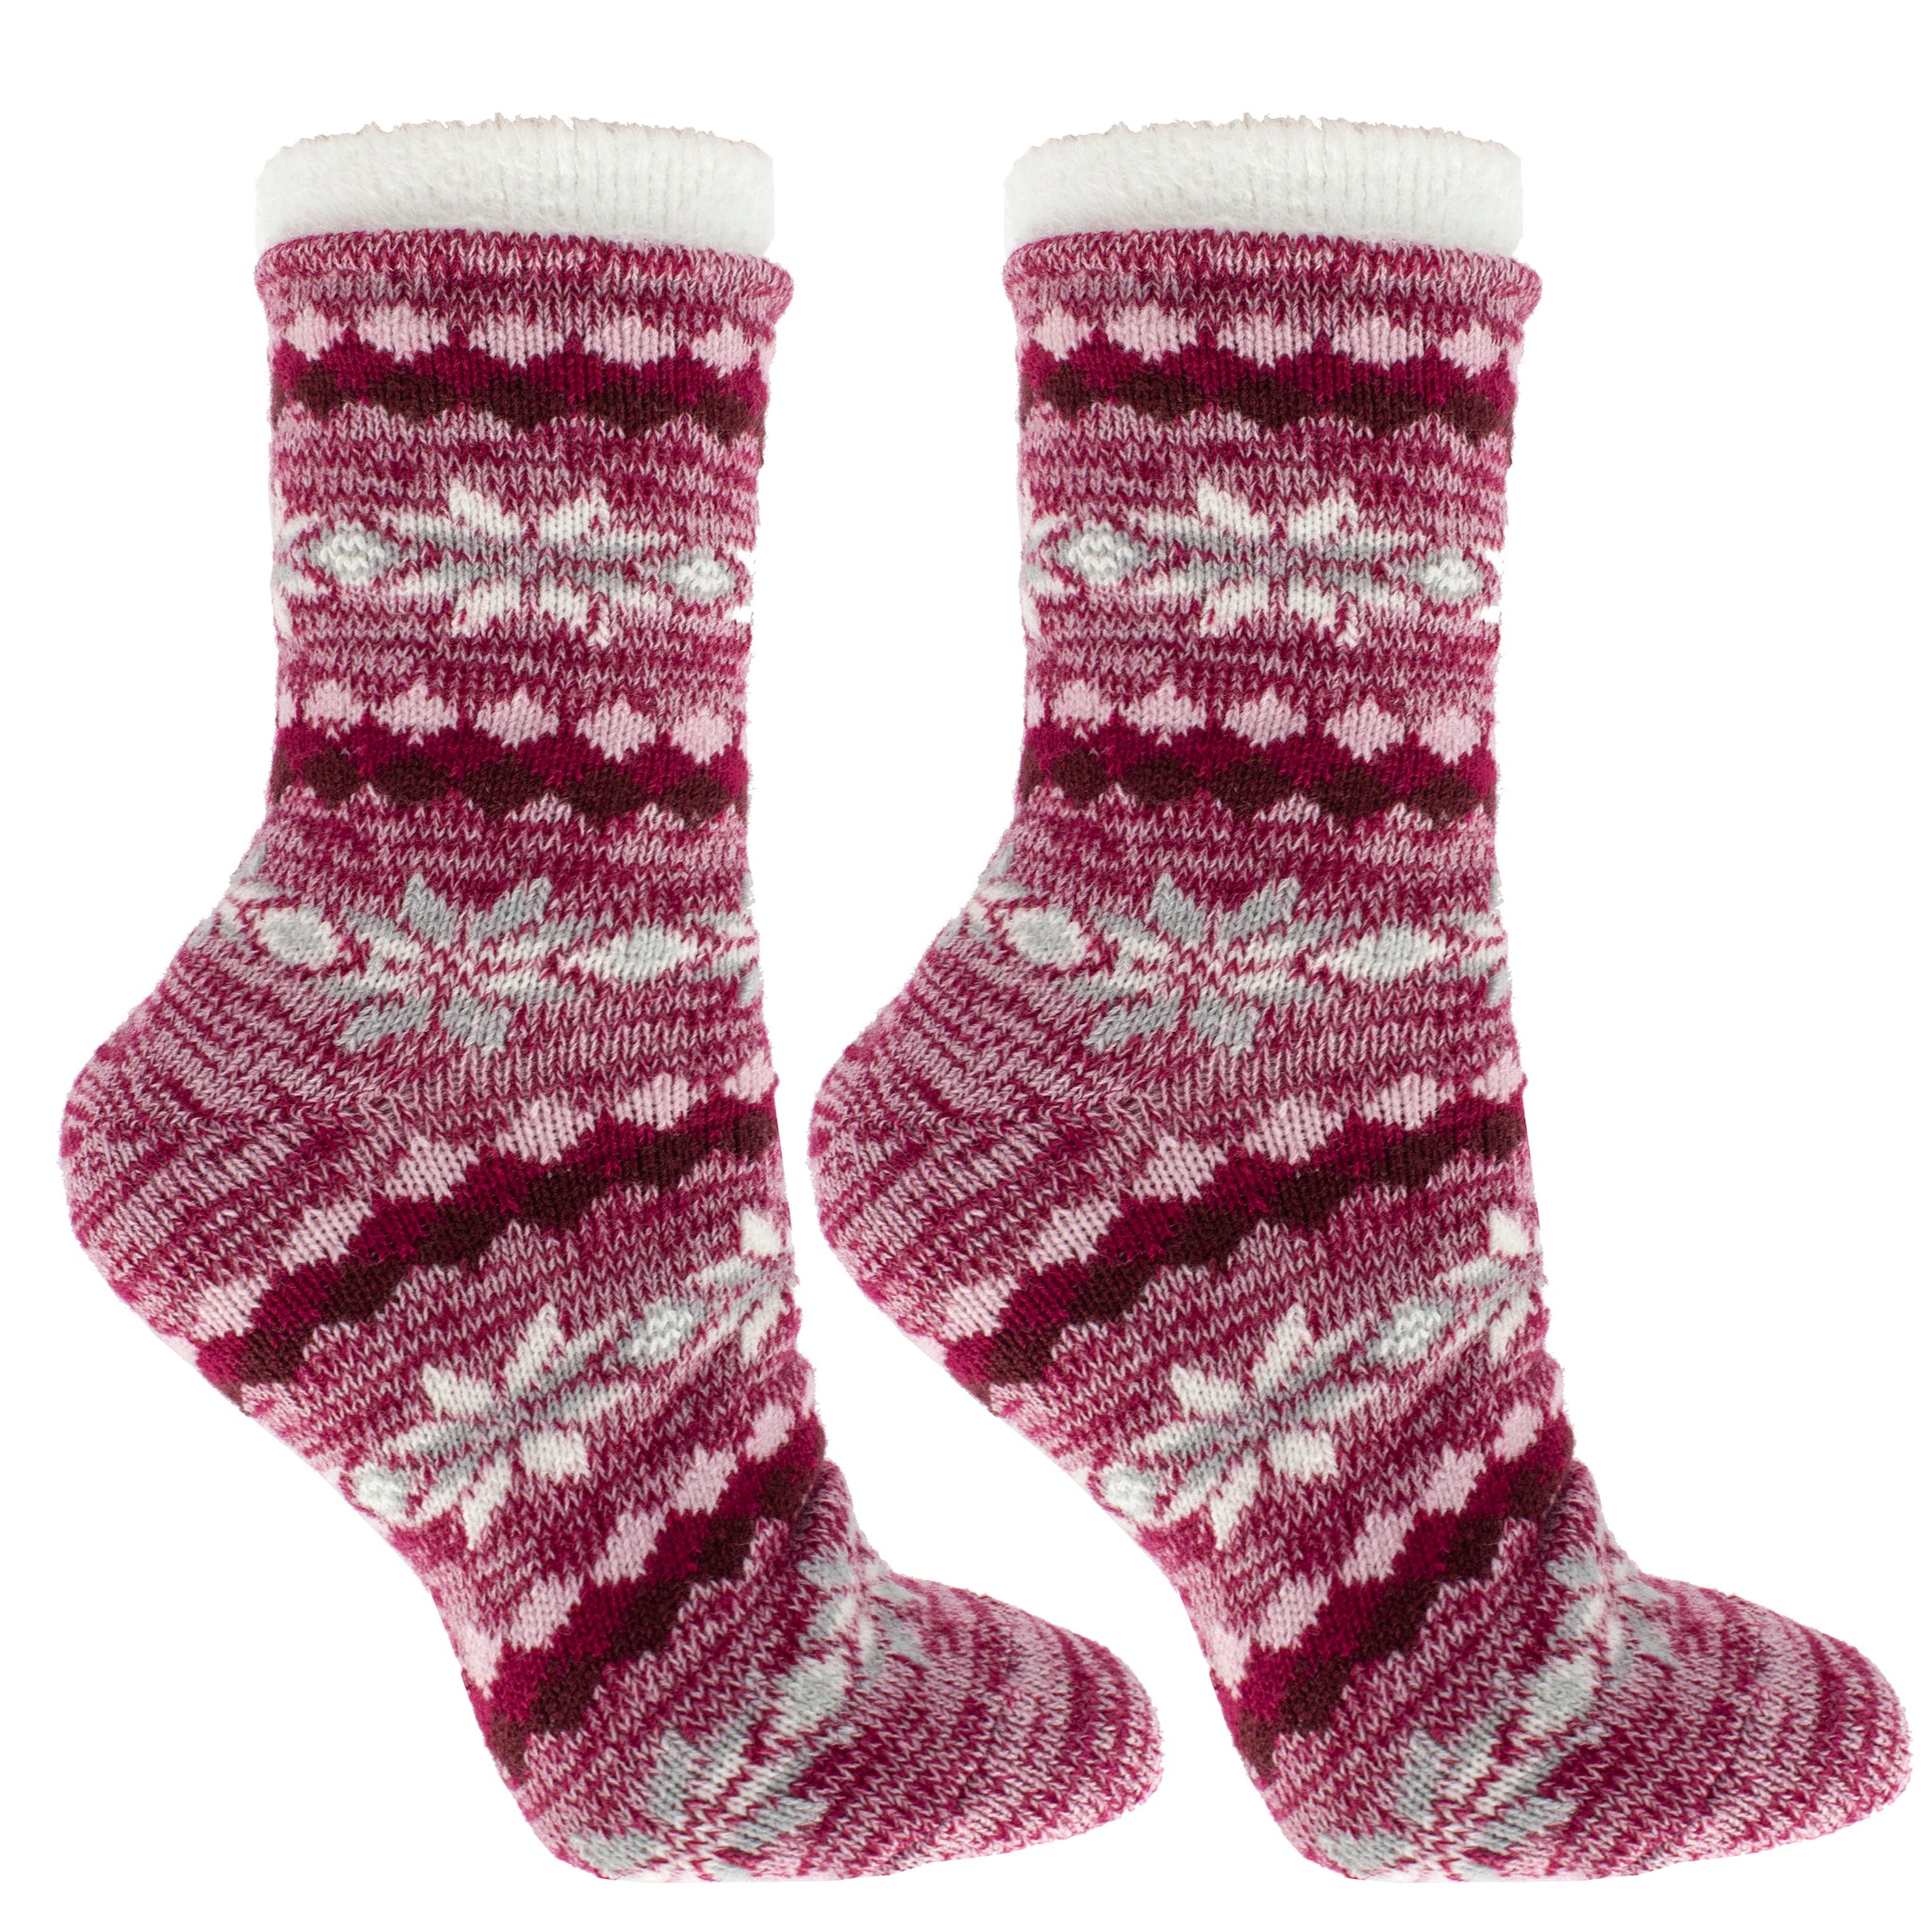 Women's Double Layer Aspen Non-Skid Warm Soft and Fuzzy Eucalyptus Mint and Shea Butter Infused Slipper Socks Gift, Heather Red